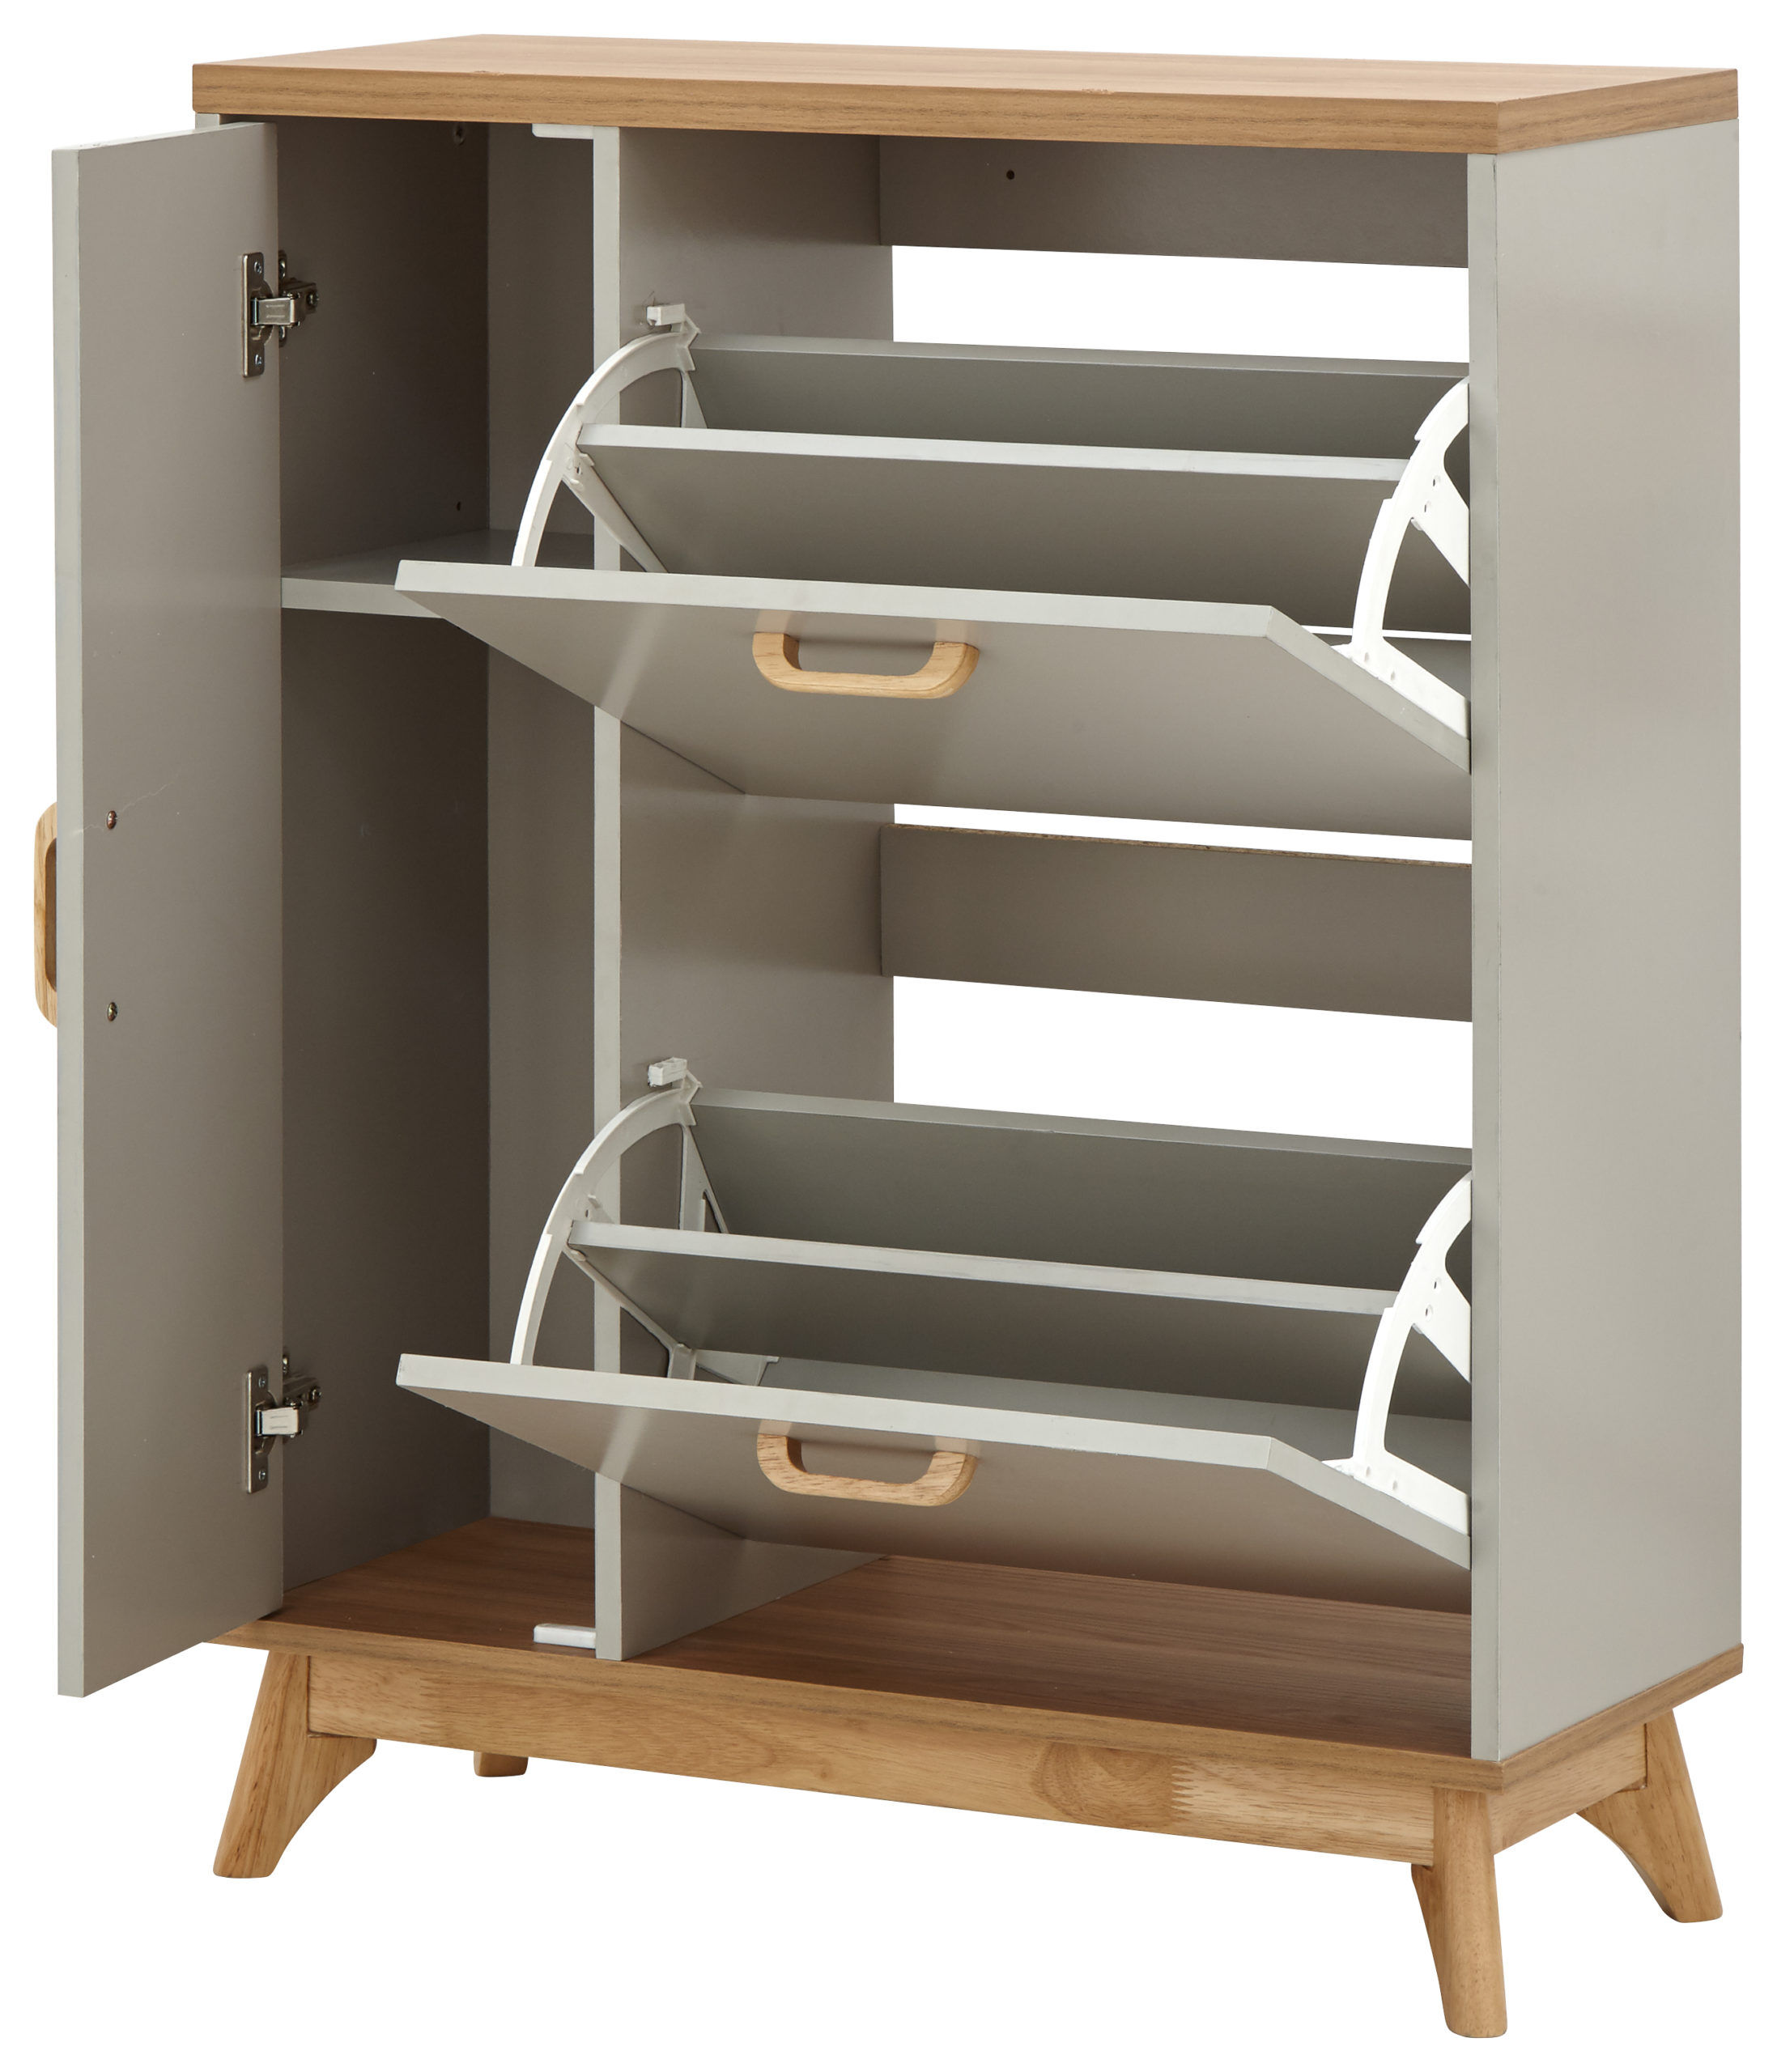 Deluxe Storage & Seating Viking Shoe & Boot Cabinet   Oak   Light Grey   Self Assembly